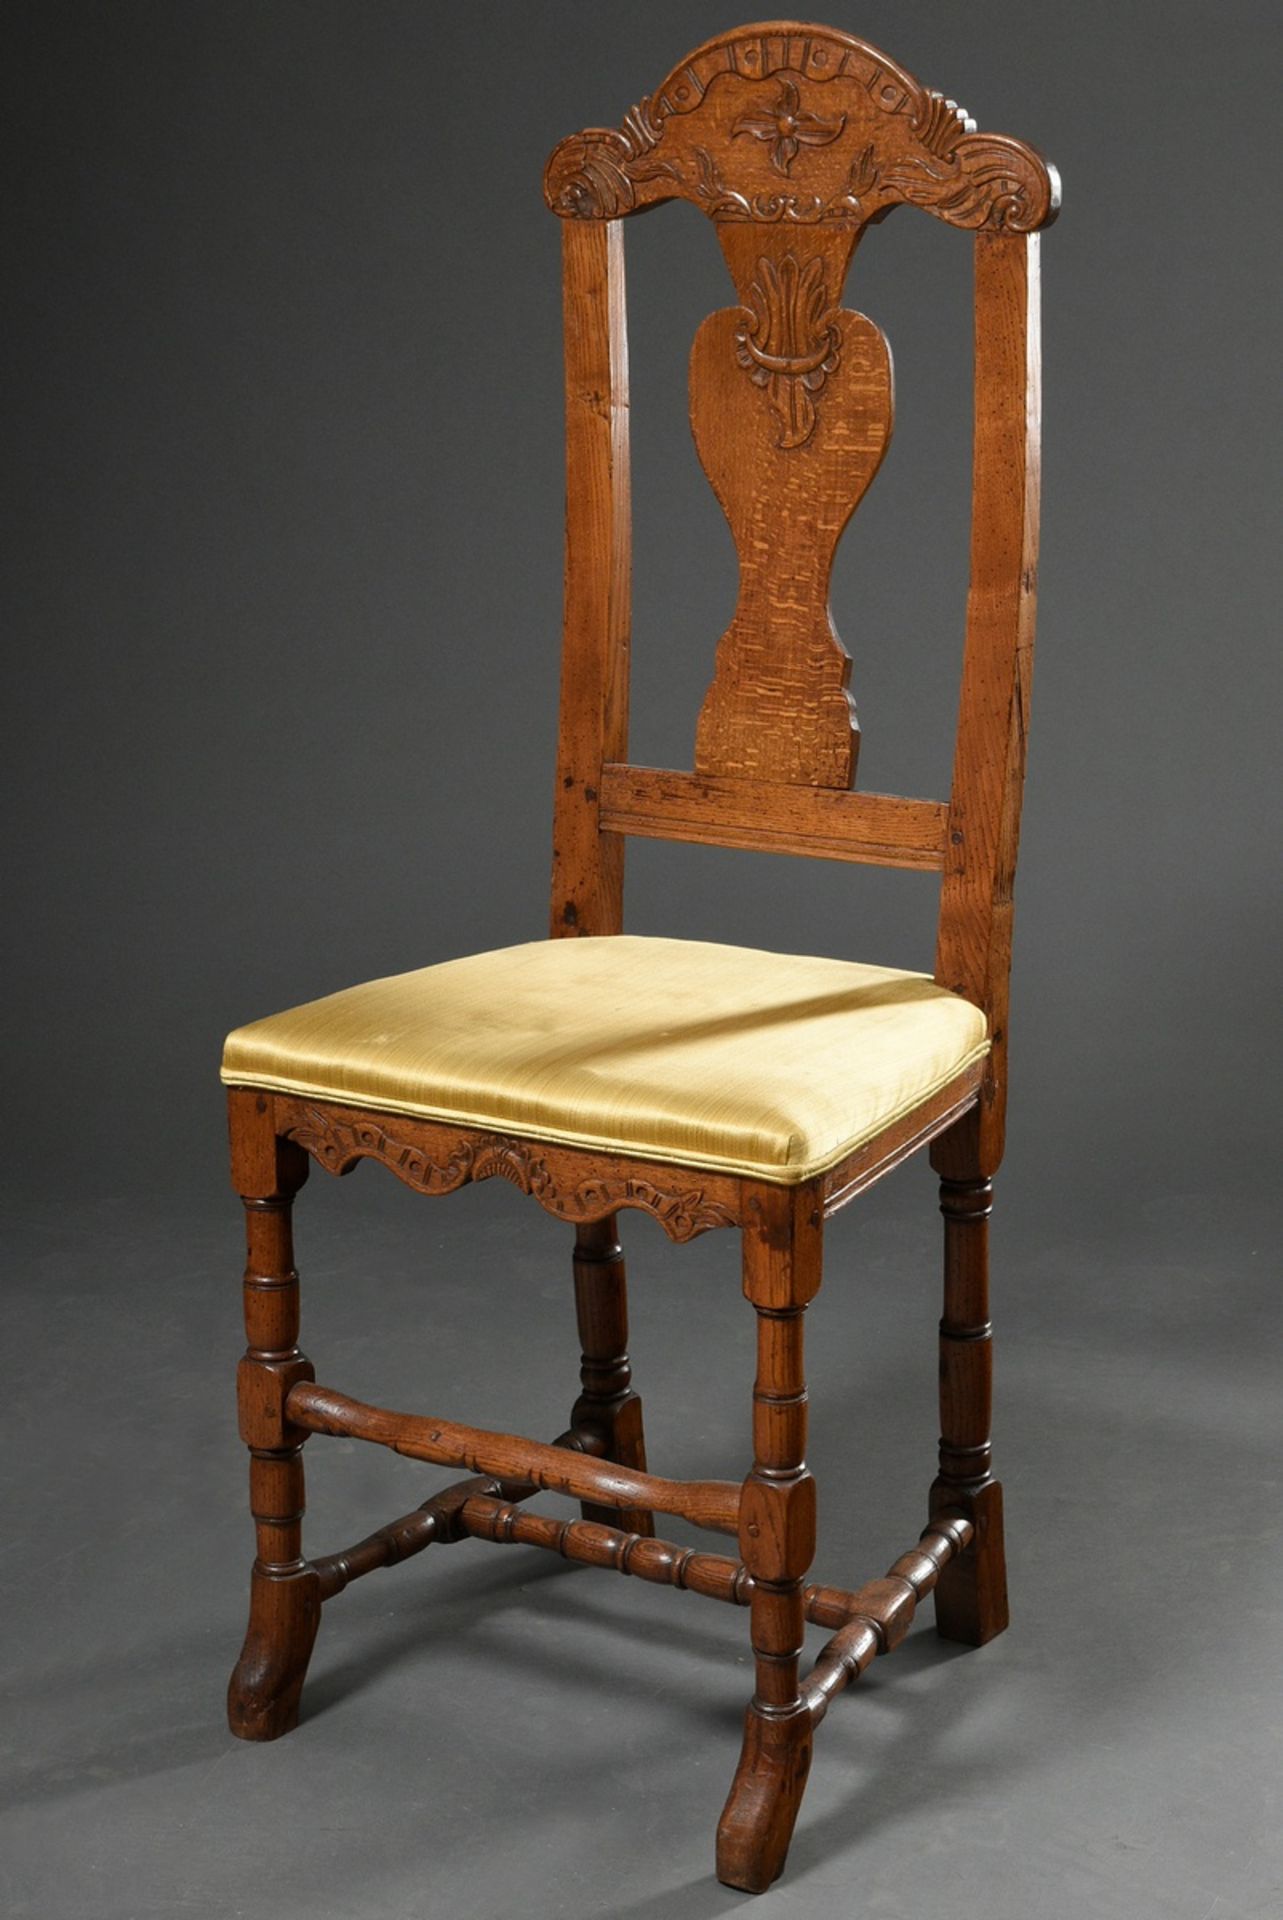 4 Flensburg Baroque chairs with floral carved back board, oak, 1st half 18th c., h. 48/110cm - Image 5 of 7